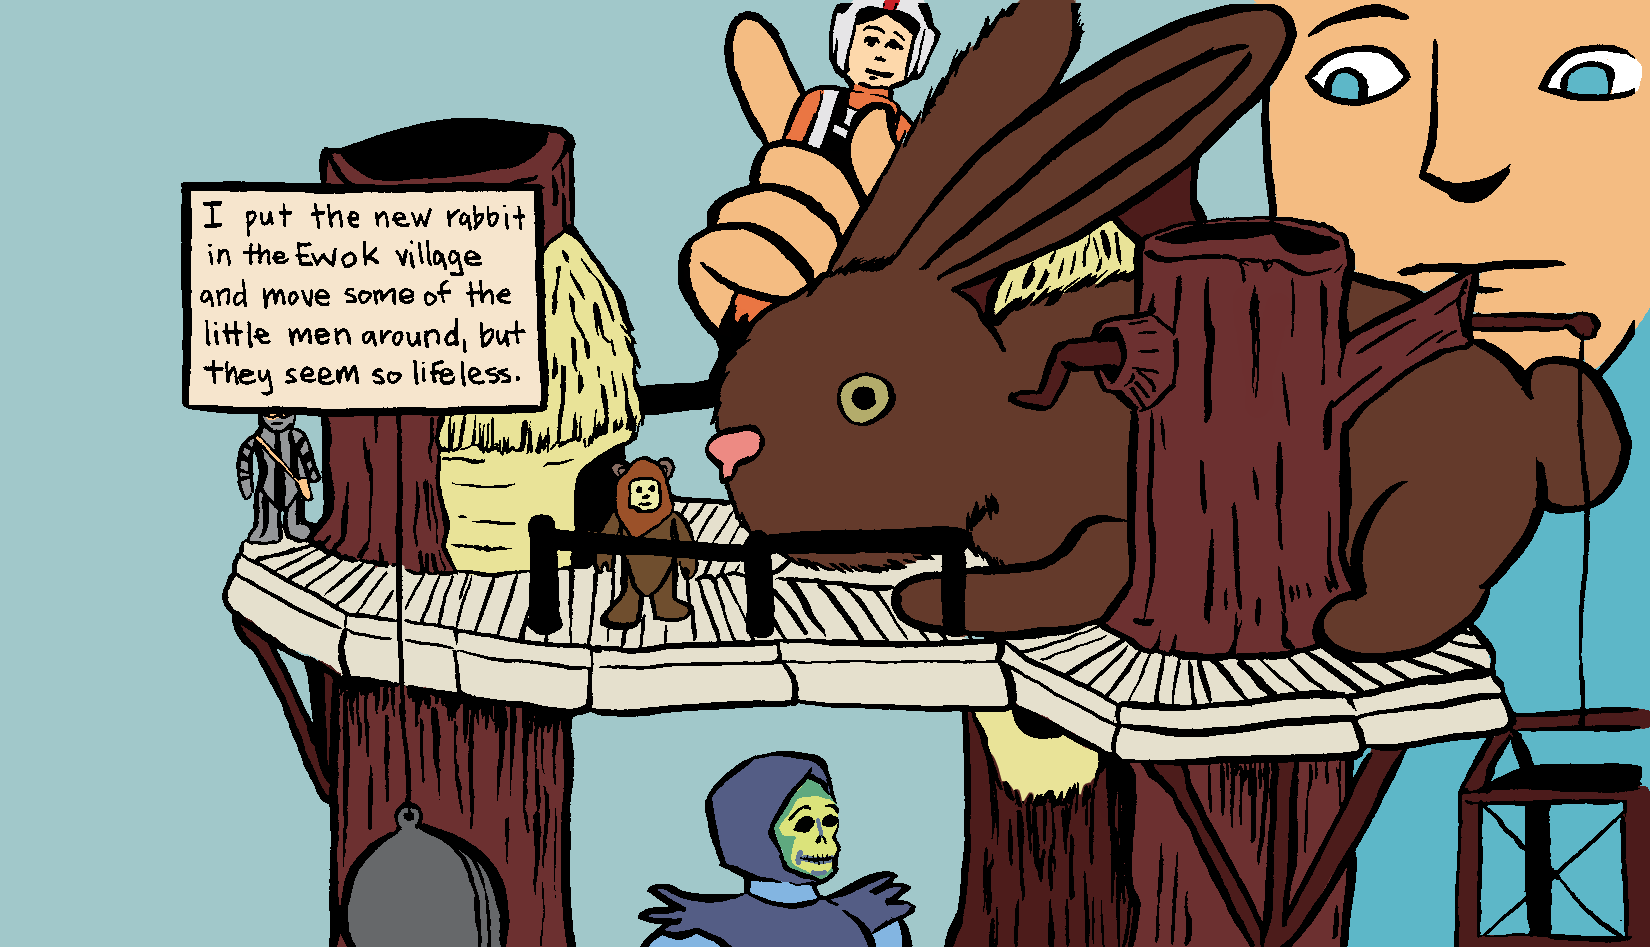 Ewok Village by Grant Thomas. A cartoon. A man overlooks a large brown rabbit which is on a bridge. It appears to be a treehouse-like structure. The main is holding an astronaut figurine and there is a skelton-figure on the lower level. The text box reads "I put the new rabbit in the ewok village and move some of the little men around but they seem so lifeless."